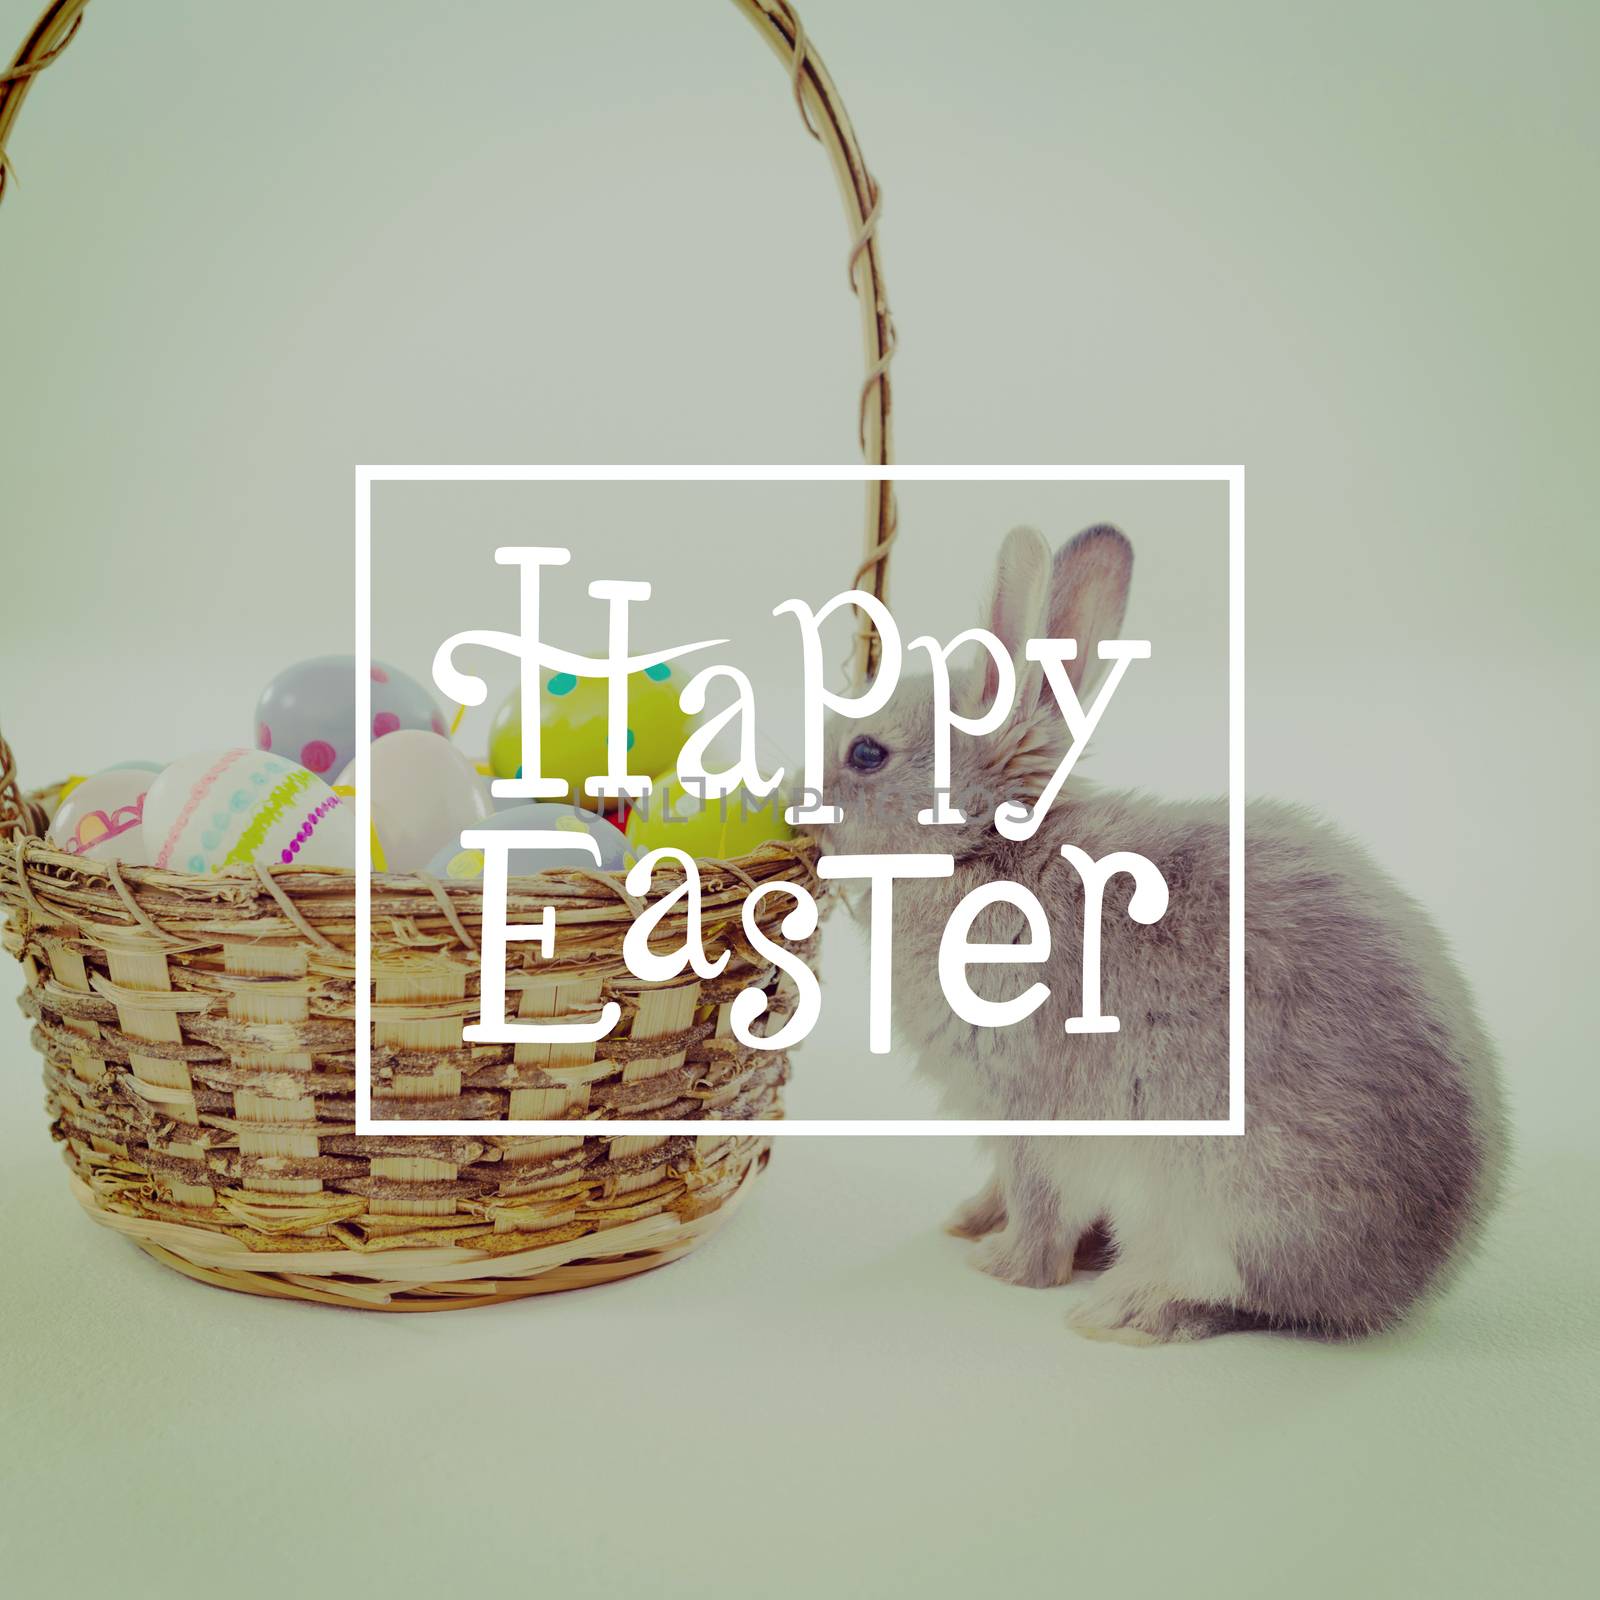 Composite image of happy easter by Wavebreakmedia